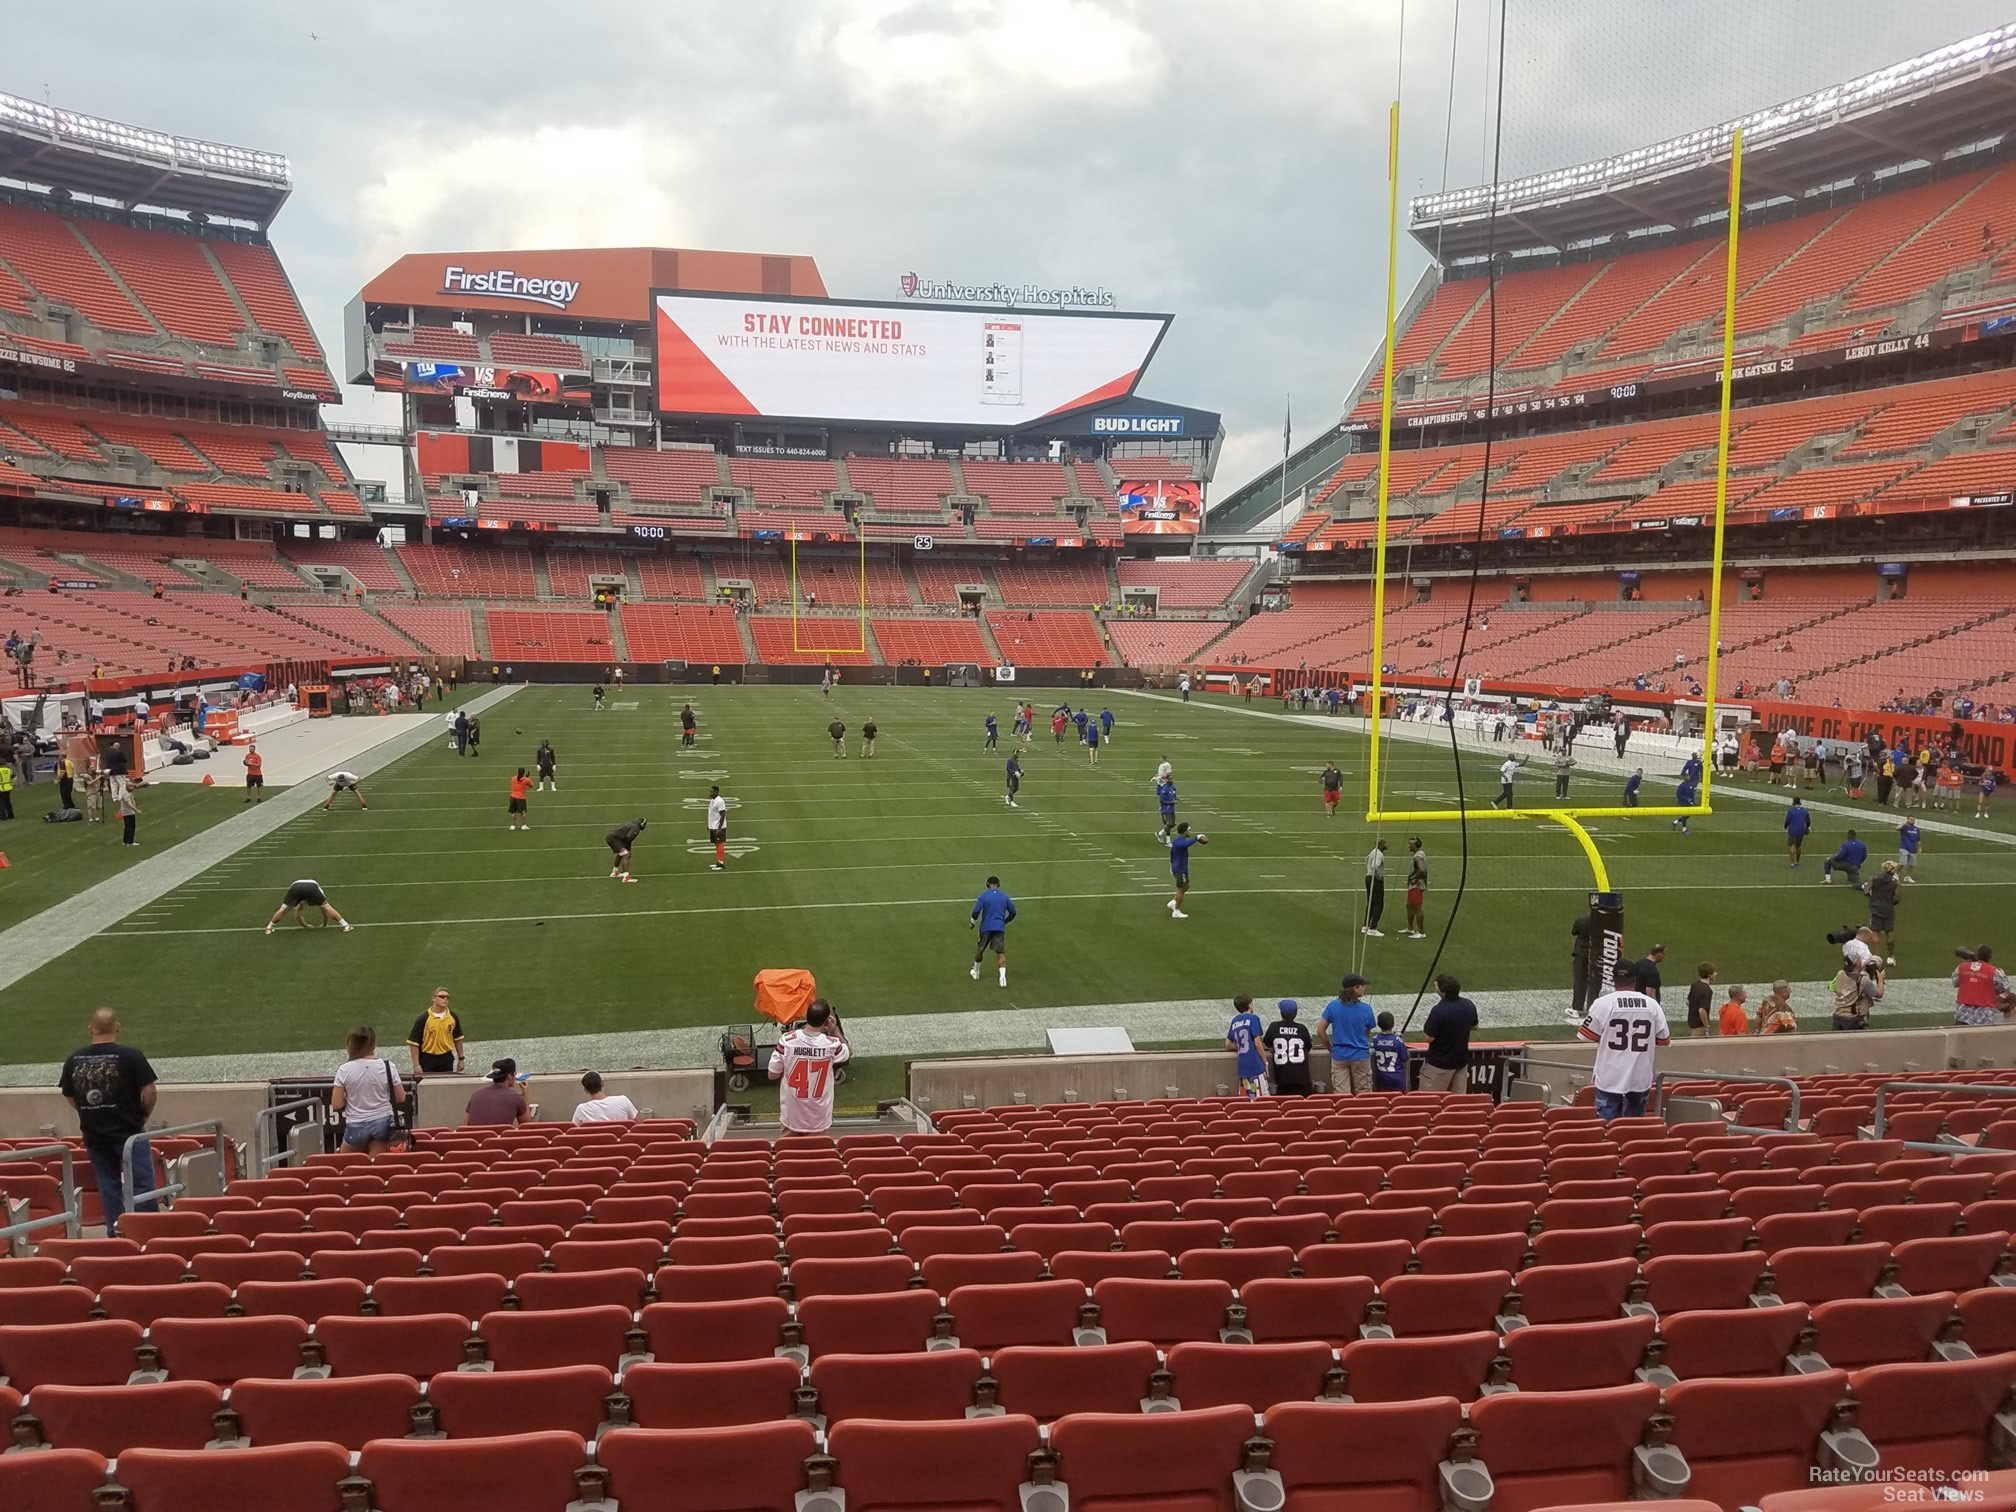 section 146, row 17 seat view  - cleveland browns stadium